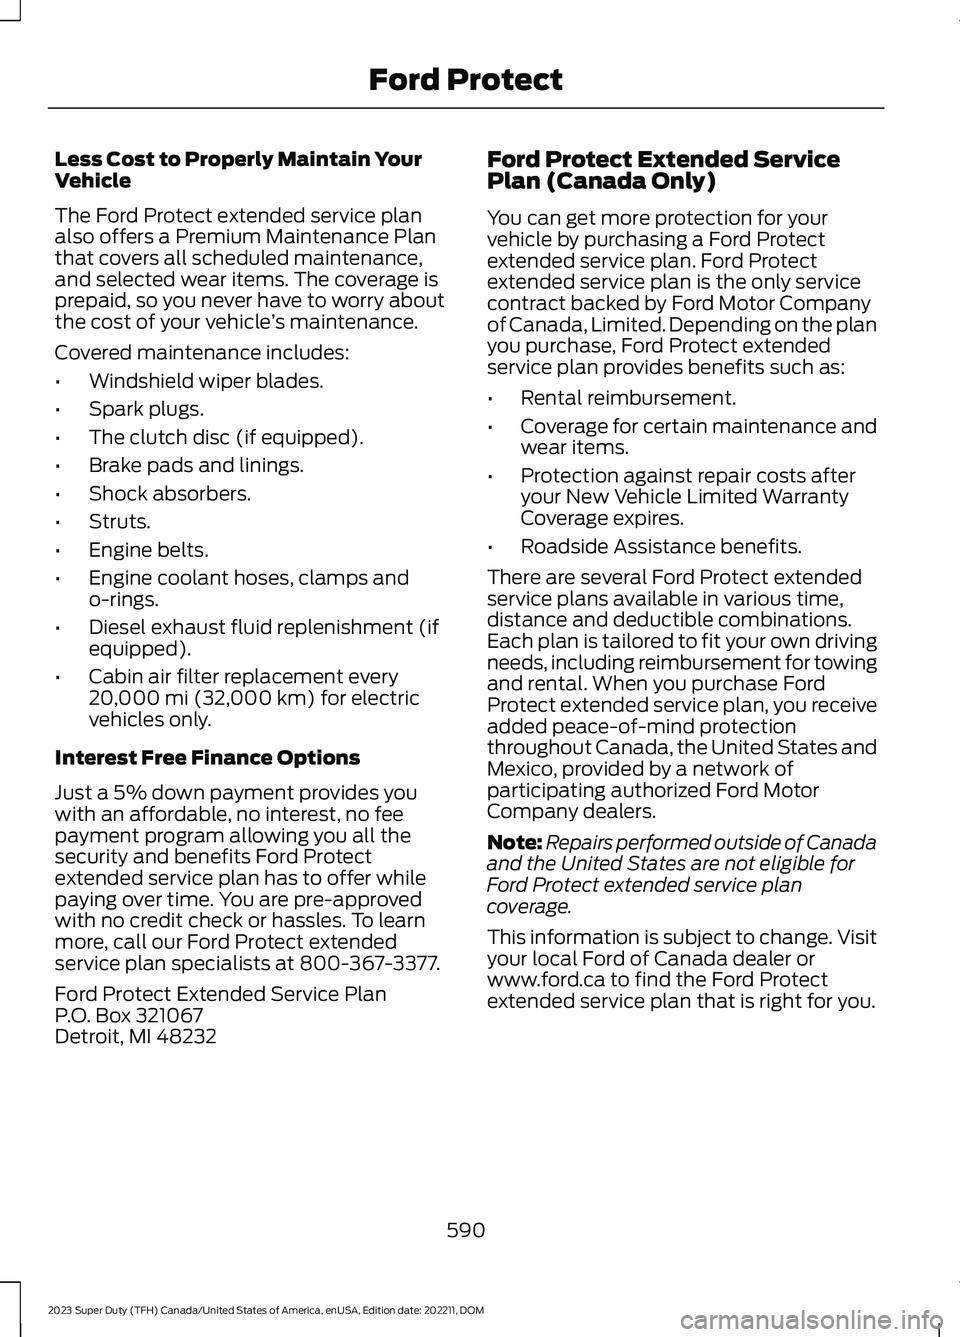 FORD SUPER DUTY 2023  Owners Manual Less Cost to Properly Maintain YourVehicle
The Ford Protect extended service planalso offers a Premium Maintenance Planthat covers all scheduled maintenance,and selected wear items. The coverage ispre